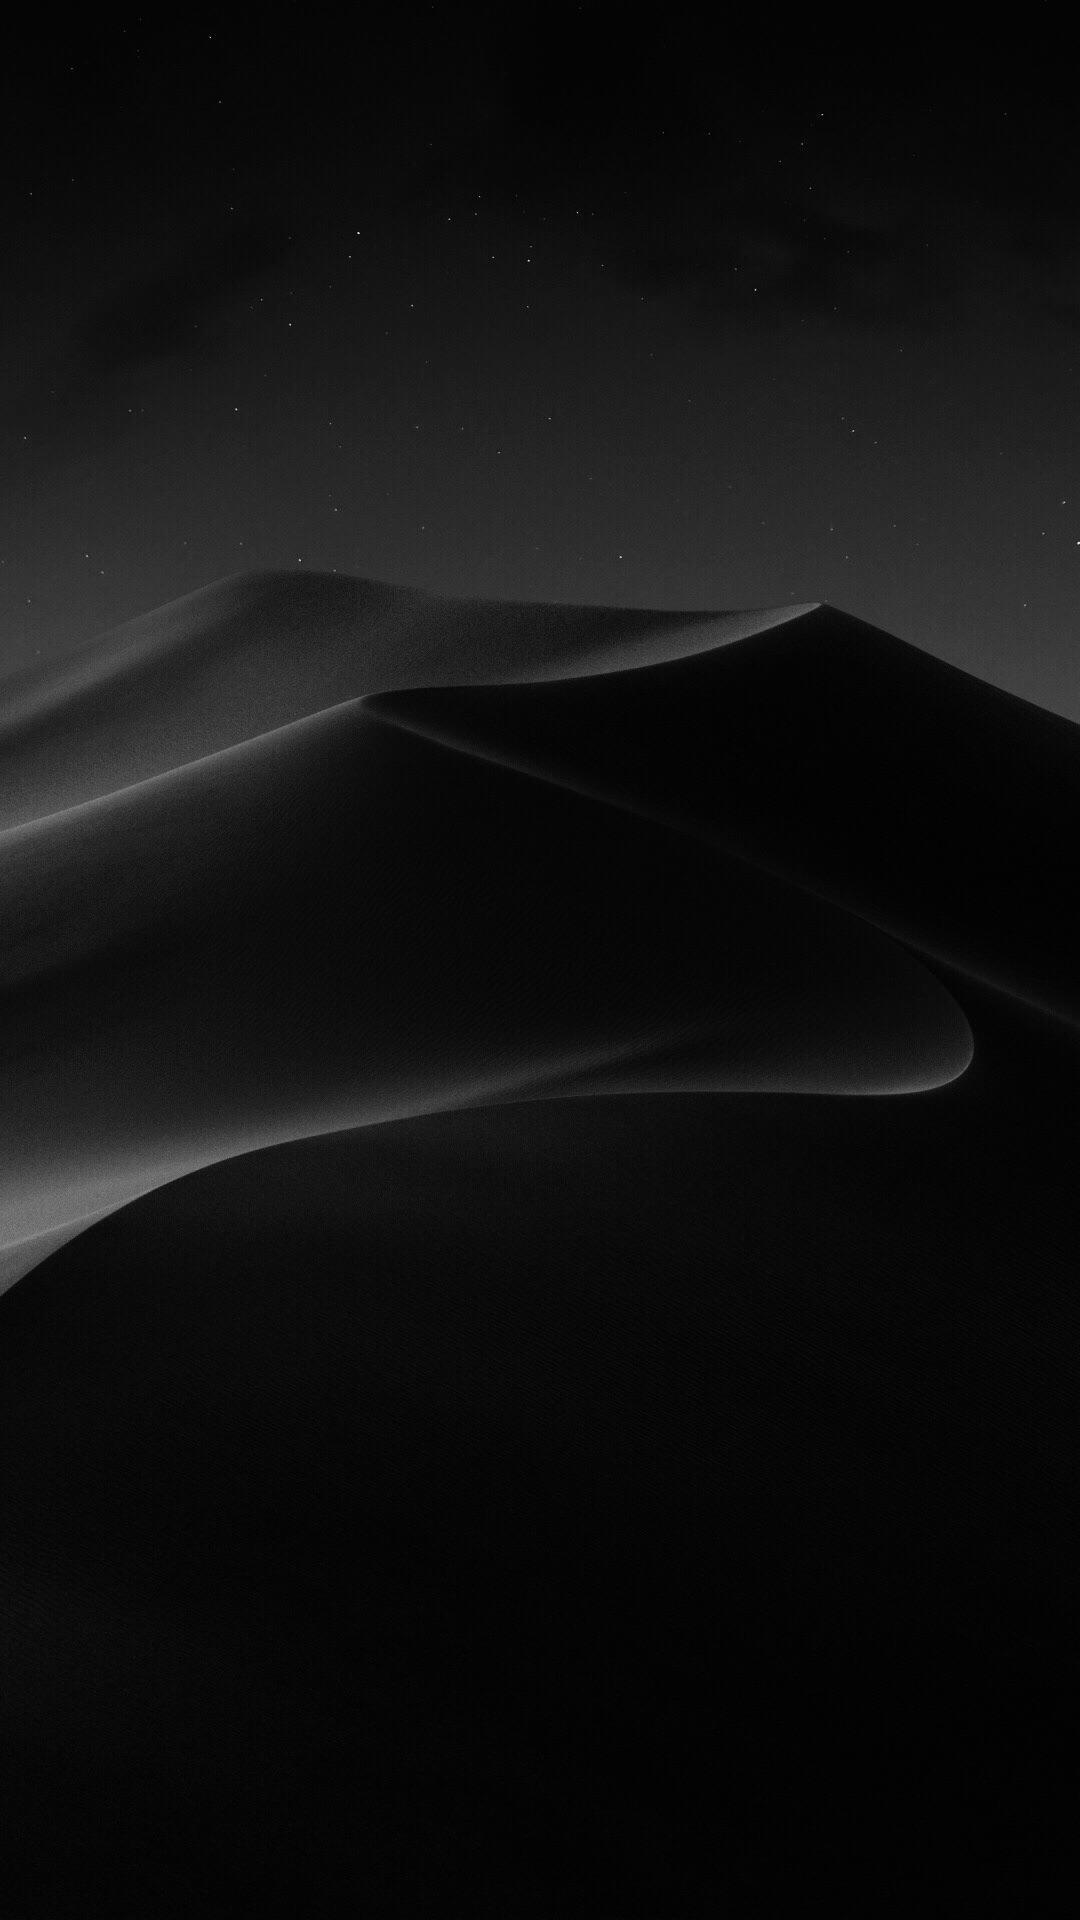 I made this monochrome dark wallpaper based on the macOS